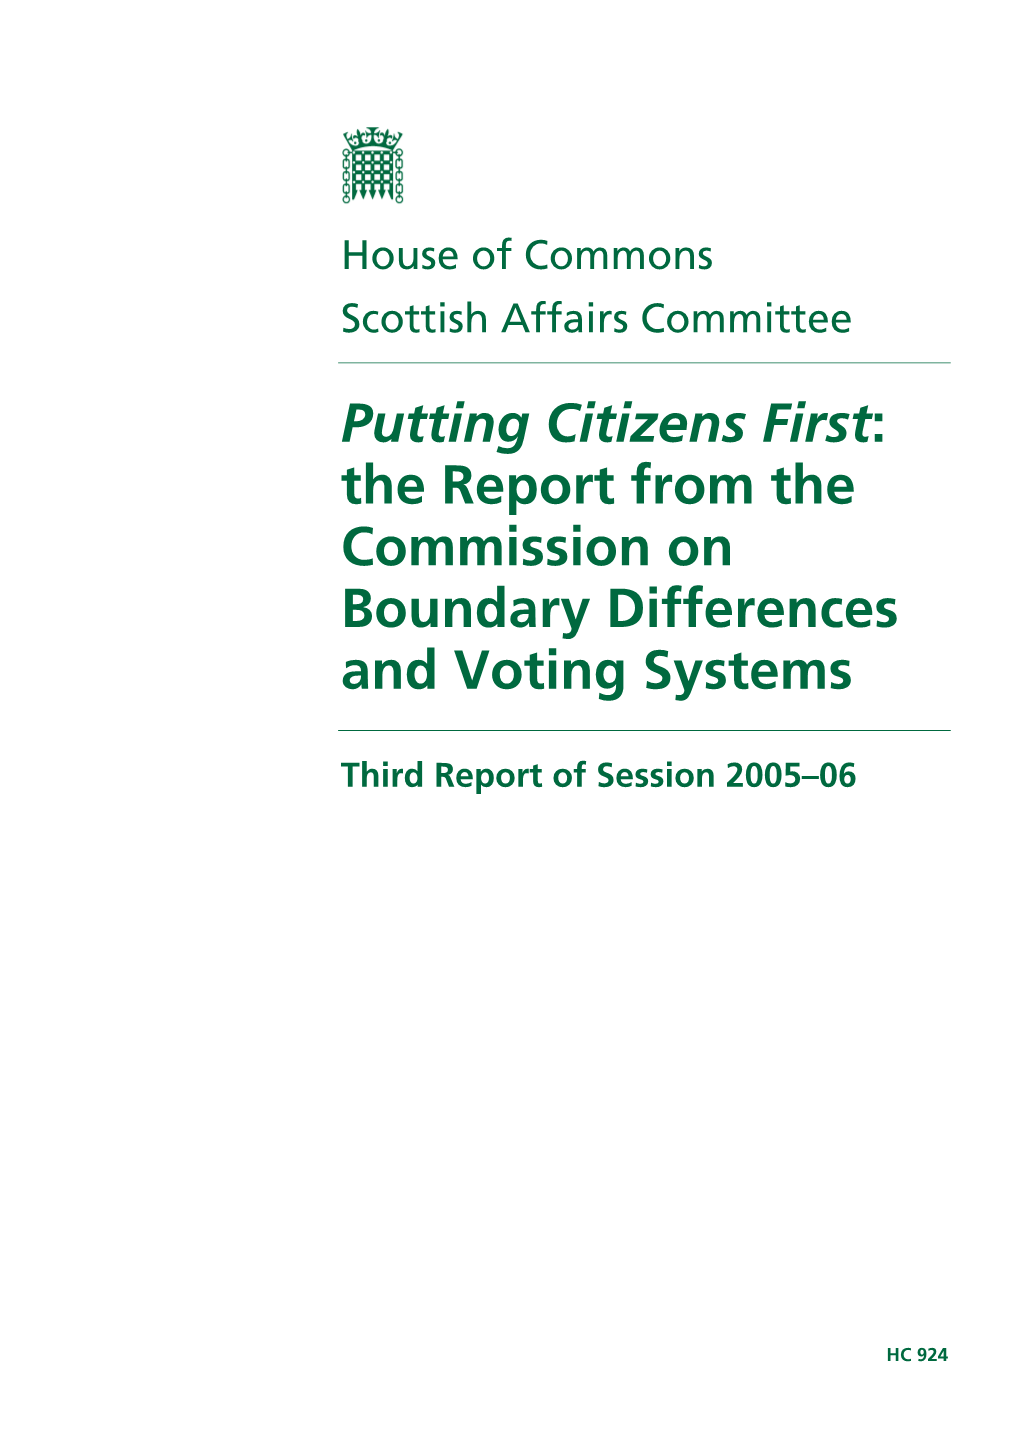 Putting Citizens First: the Report from the Commission on Boundary Differences and Voting Systems